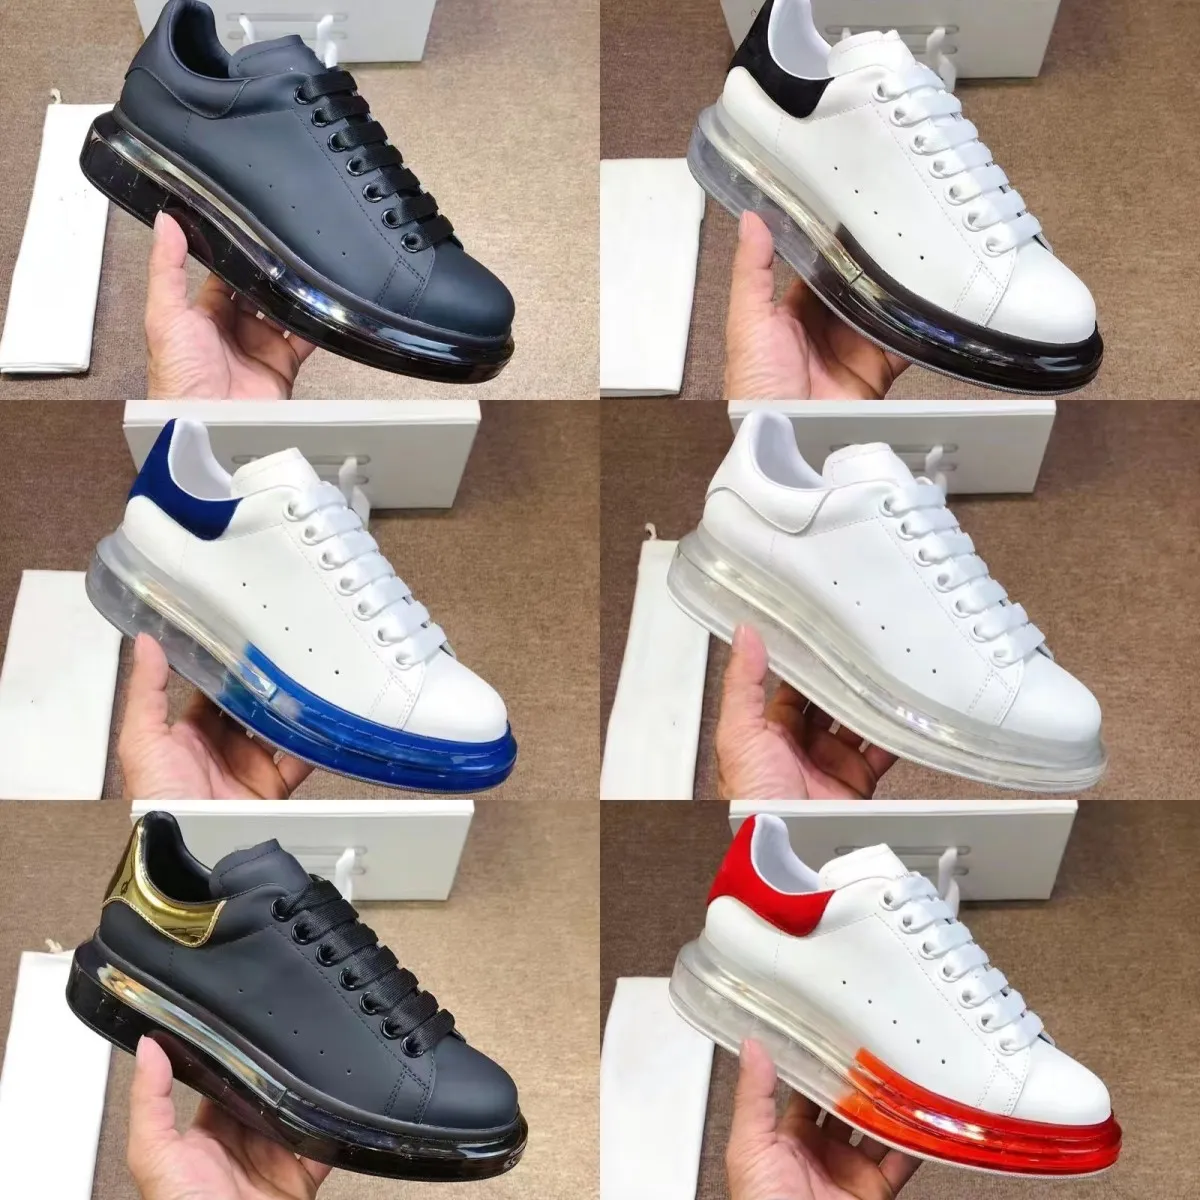 designer shoes sneakers trainers mens shoes Leather women Luxury heel Oversized Sole Air cushion Shoe flat White BlackCasual designers shoes sneakers platform